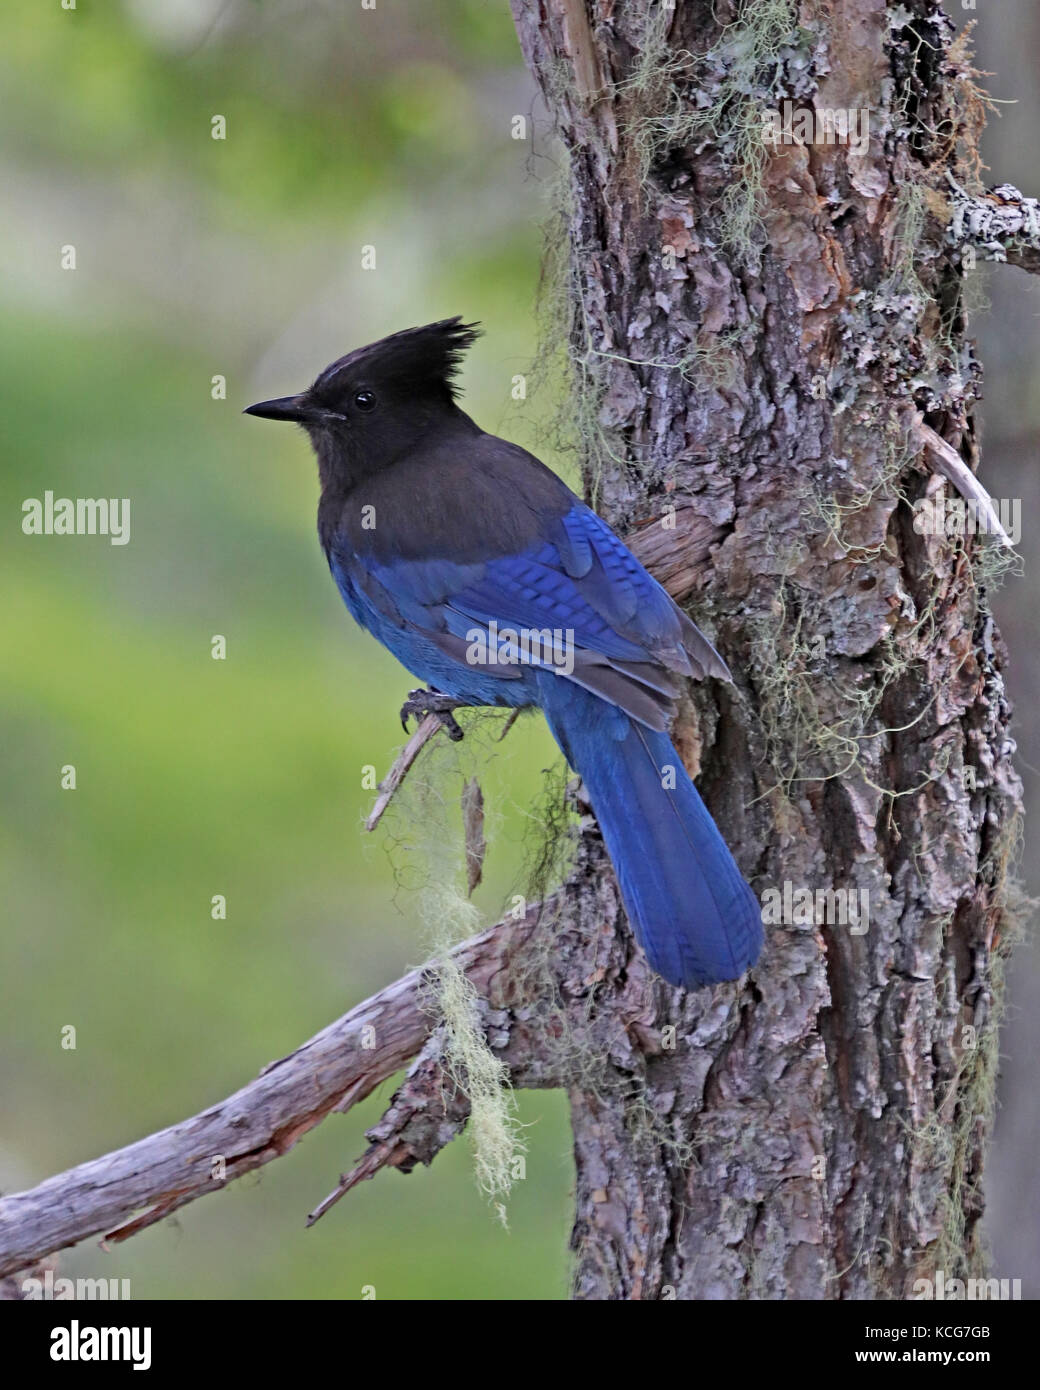 The Stellar's jay is the only New World bird to use mud to build it's nest Stock Photo